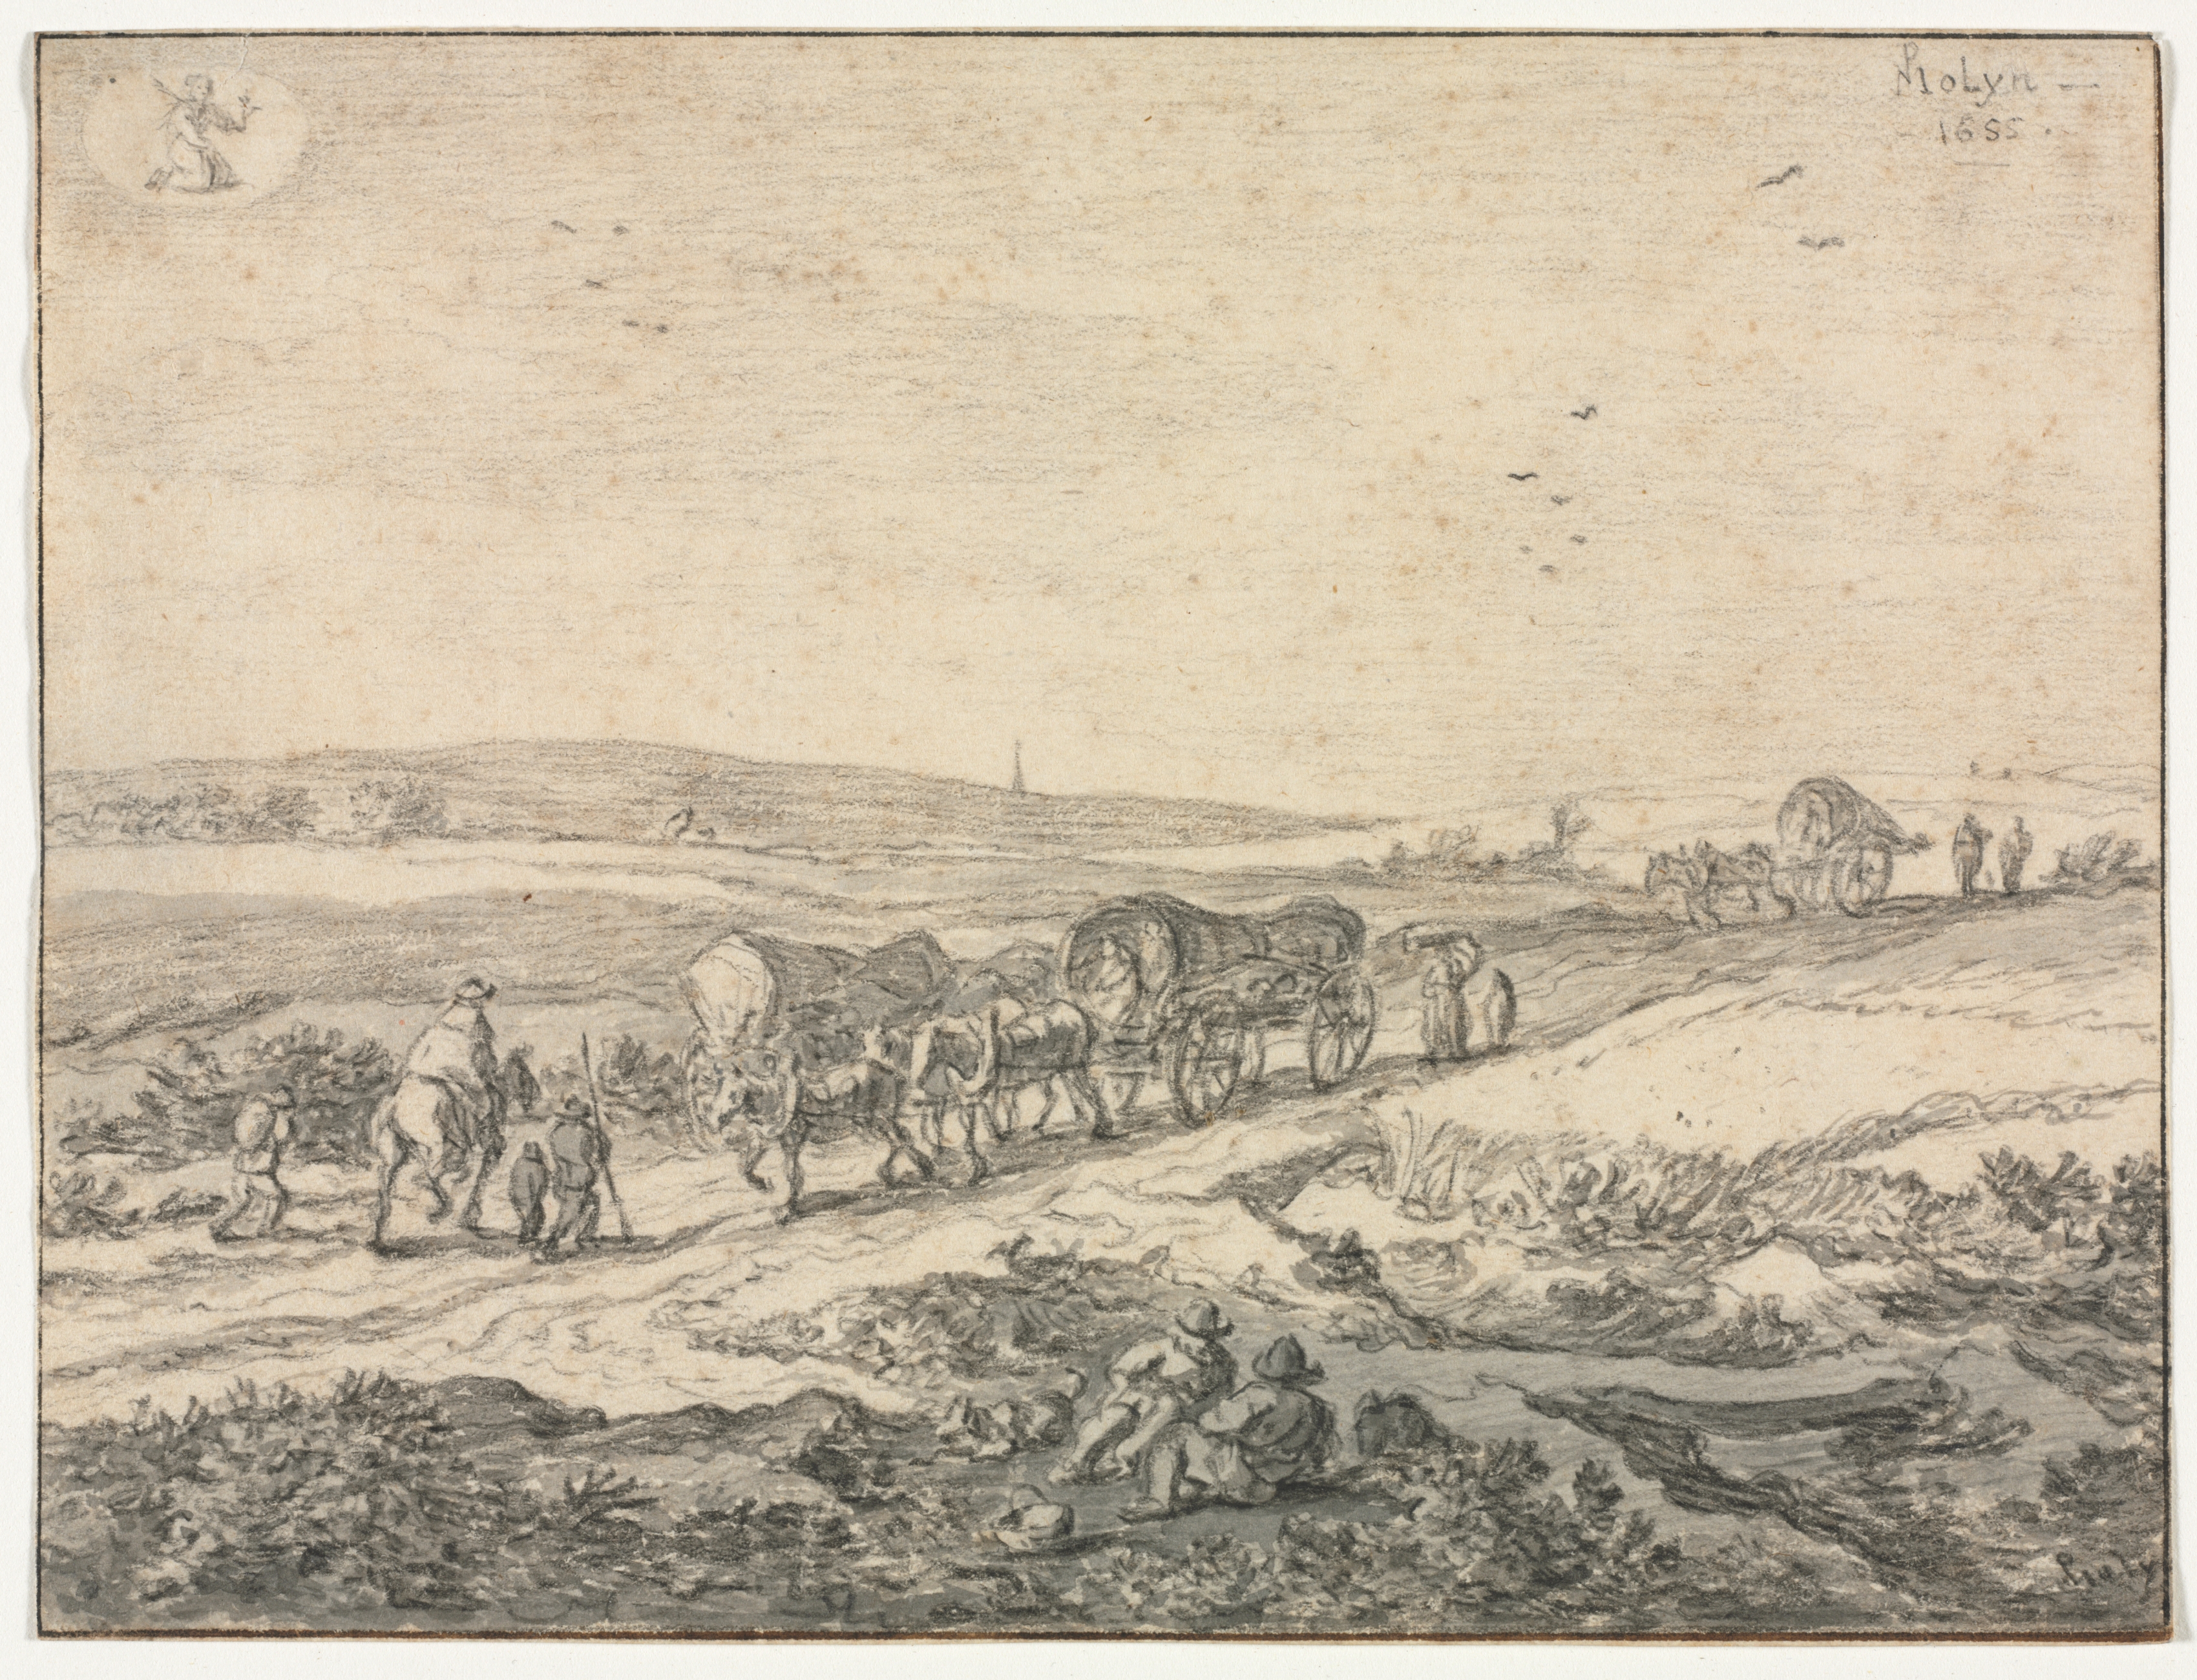 August: Landscape with Wagons